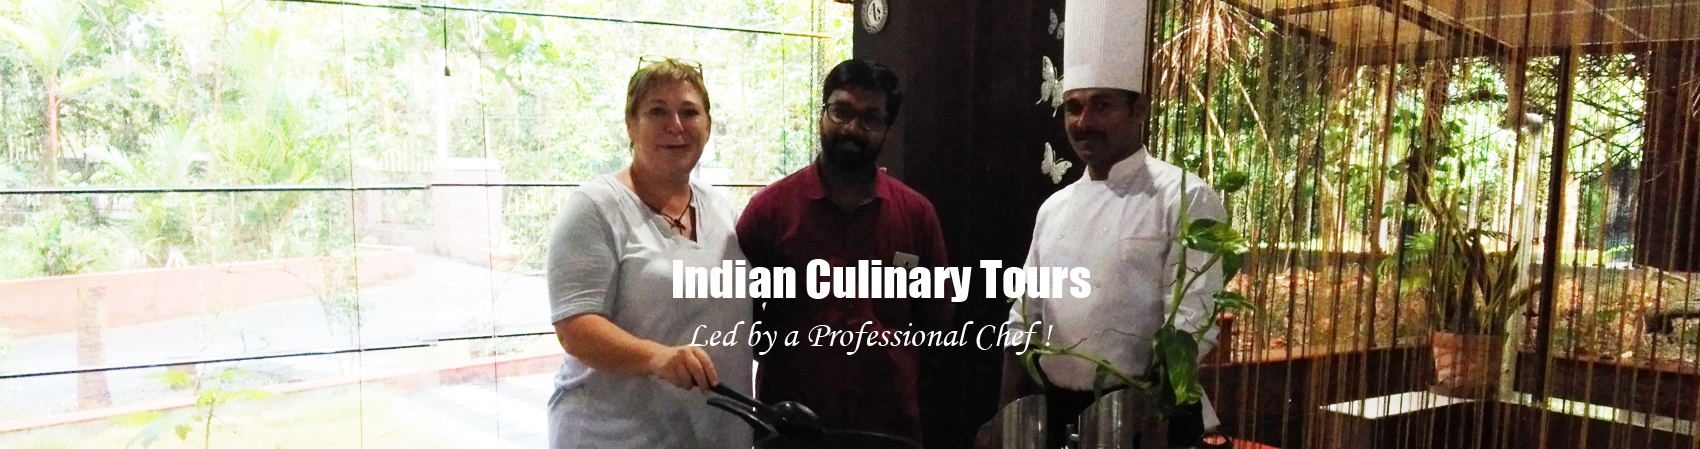 Indian Culinary Tours